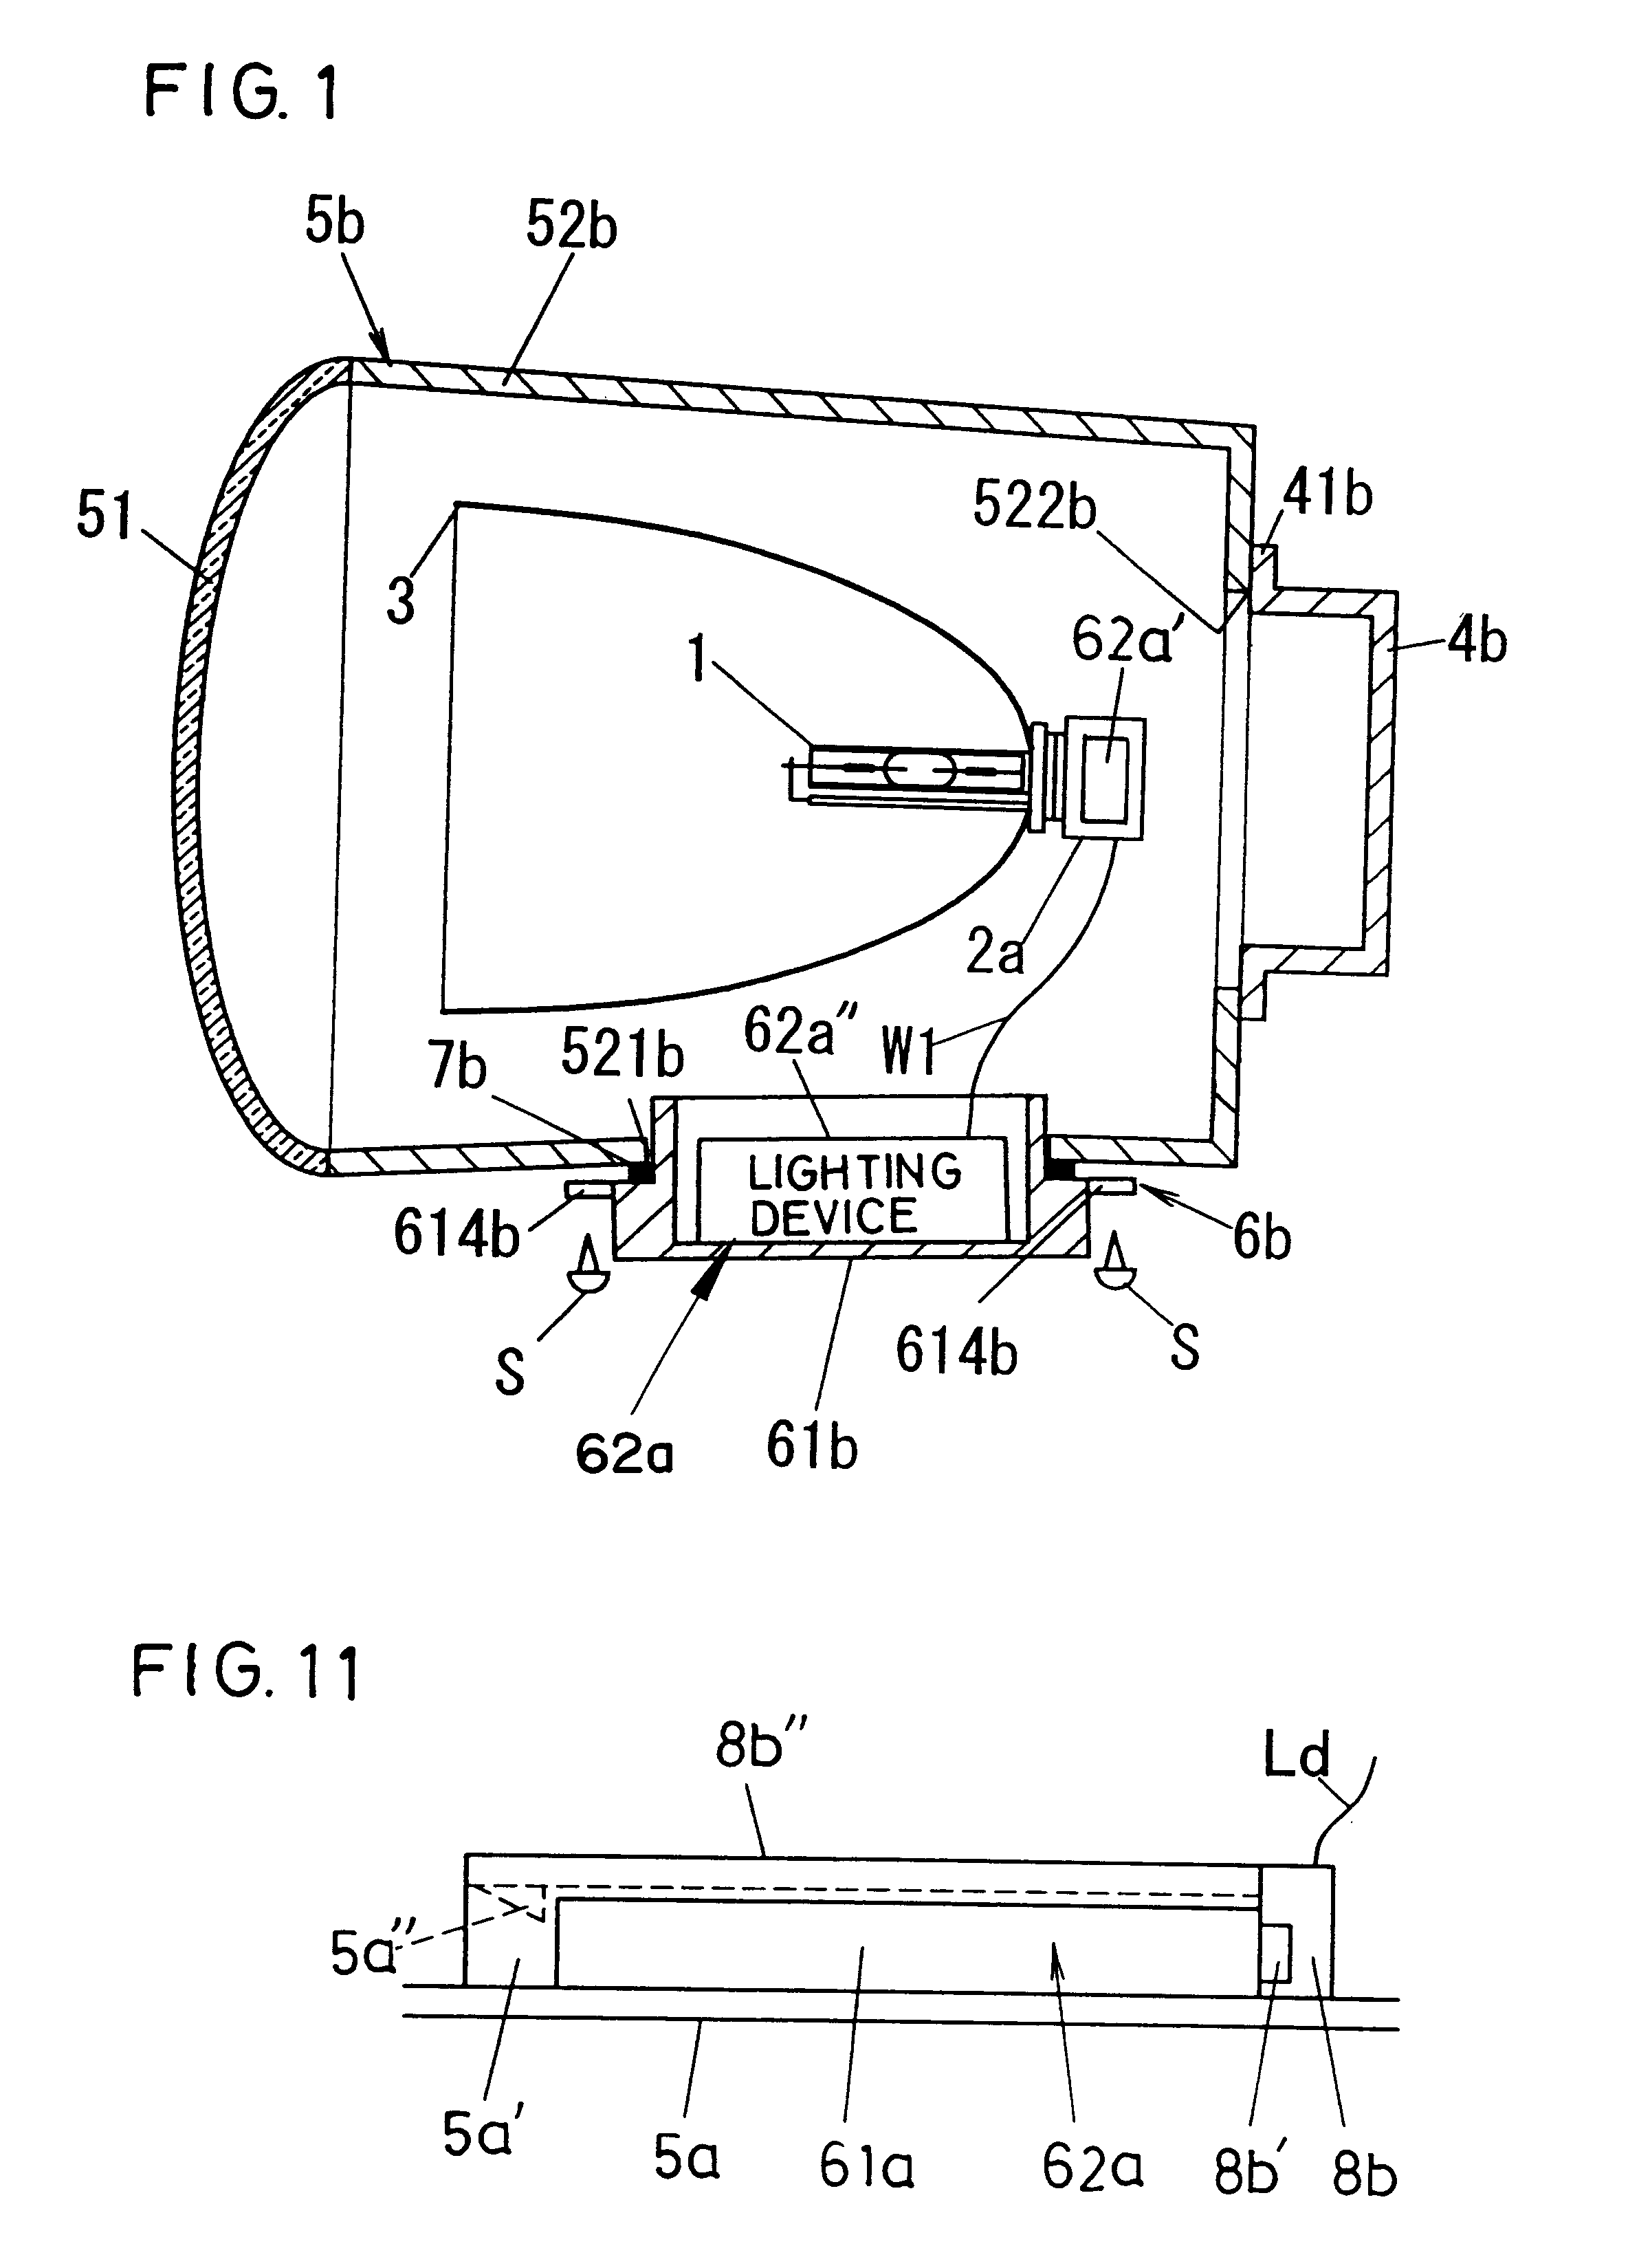 Illumination device having an inverter and an igniter disposed in a lamp body